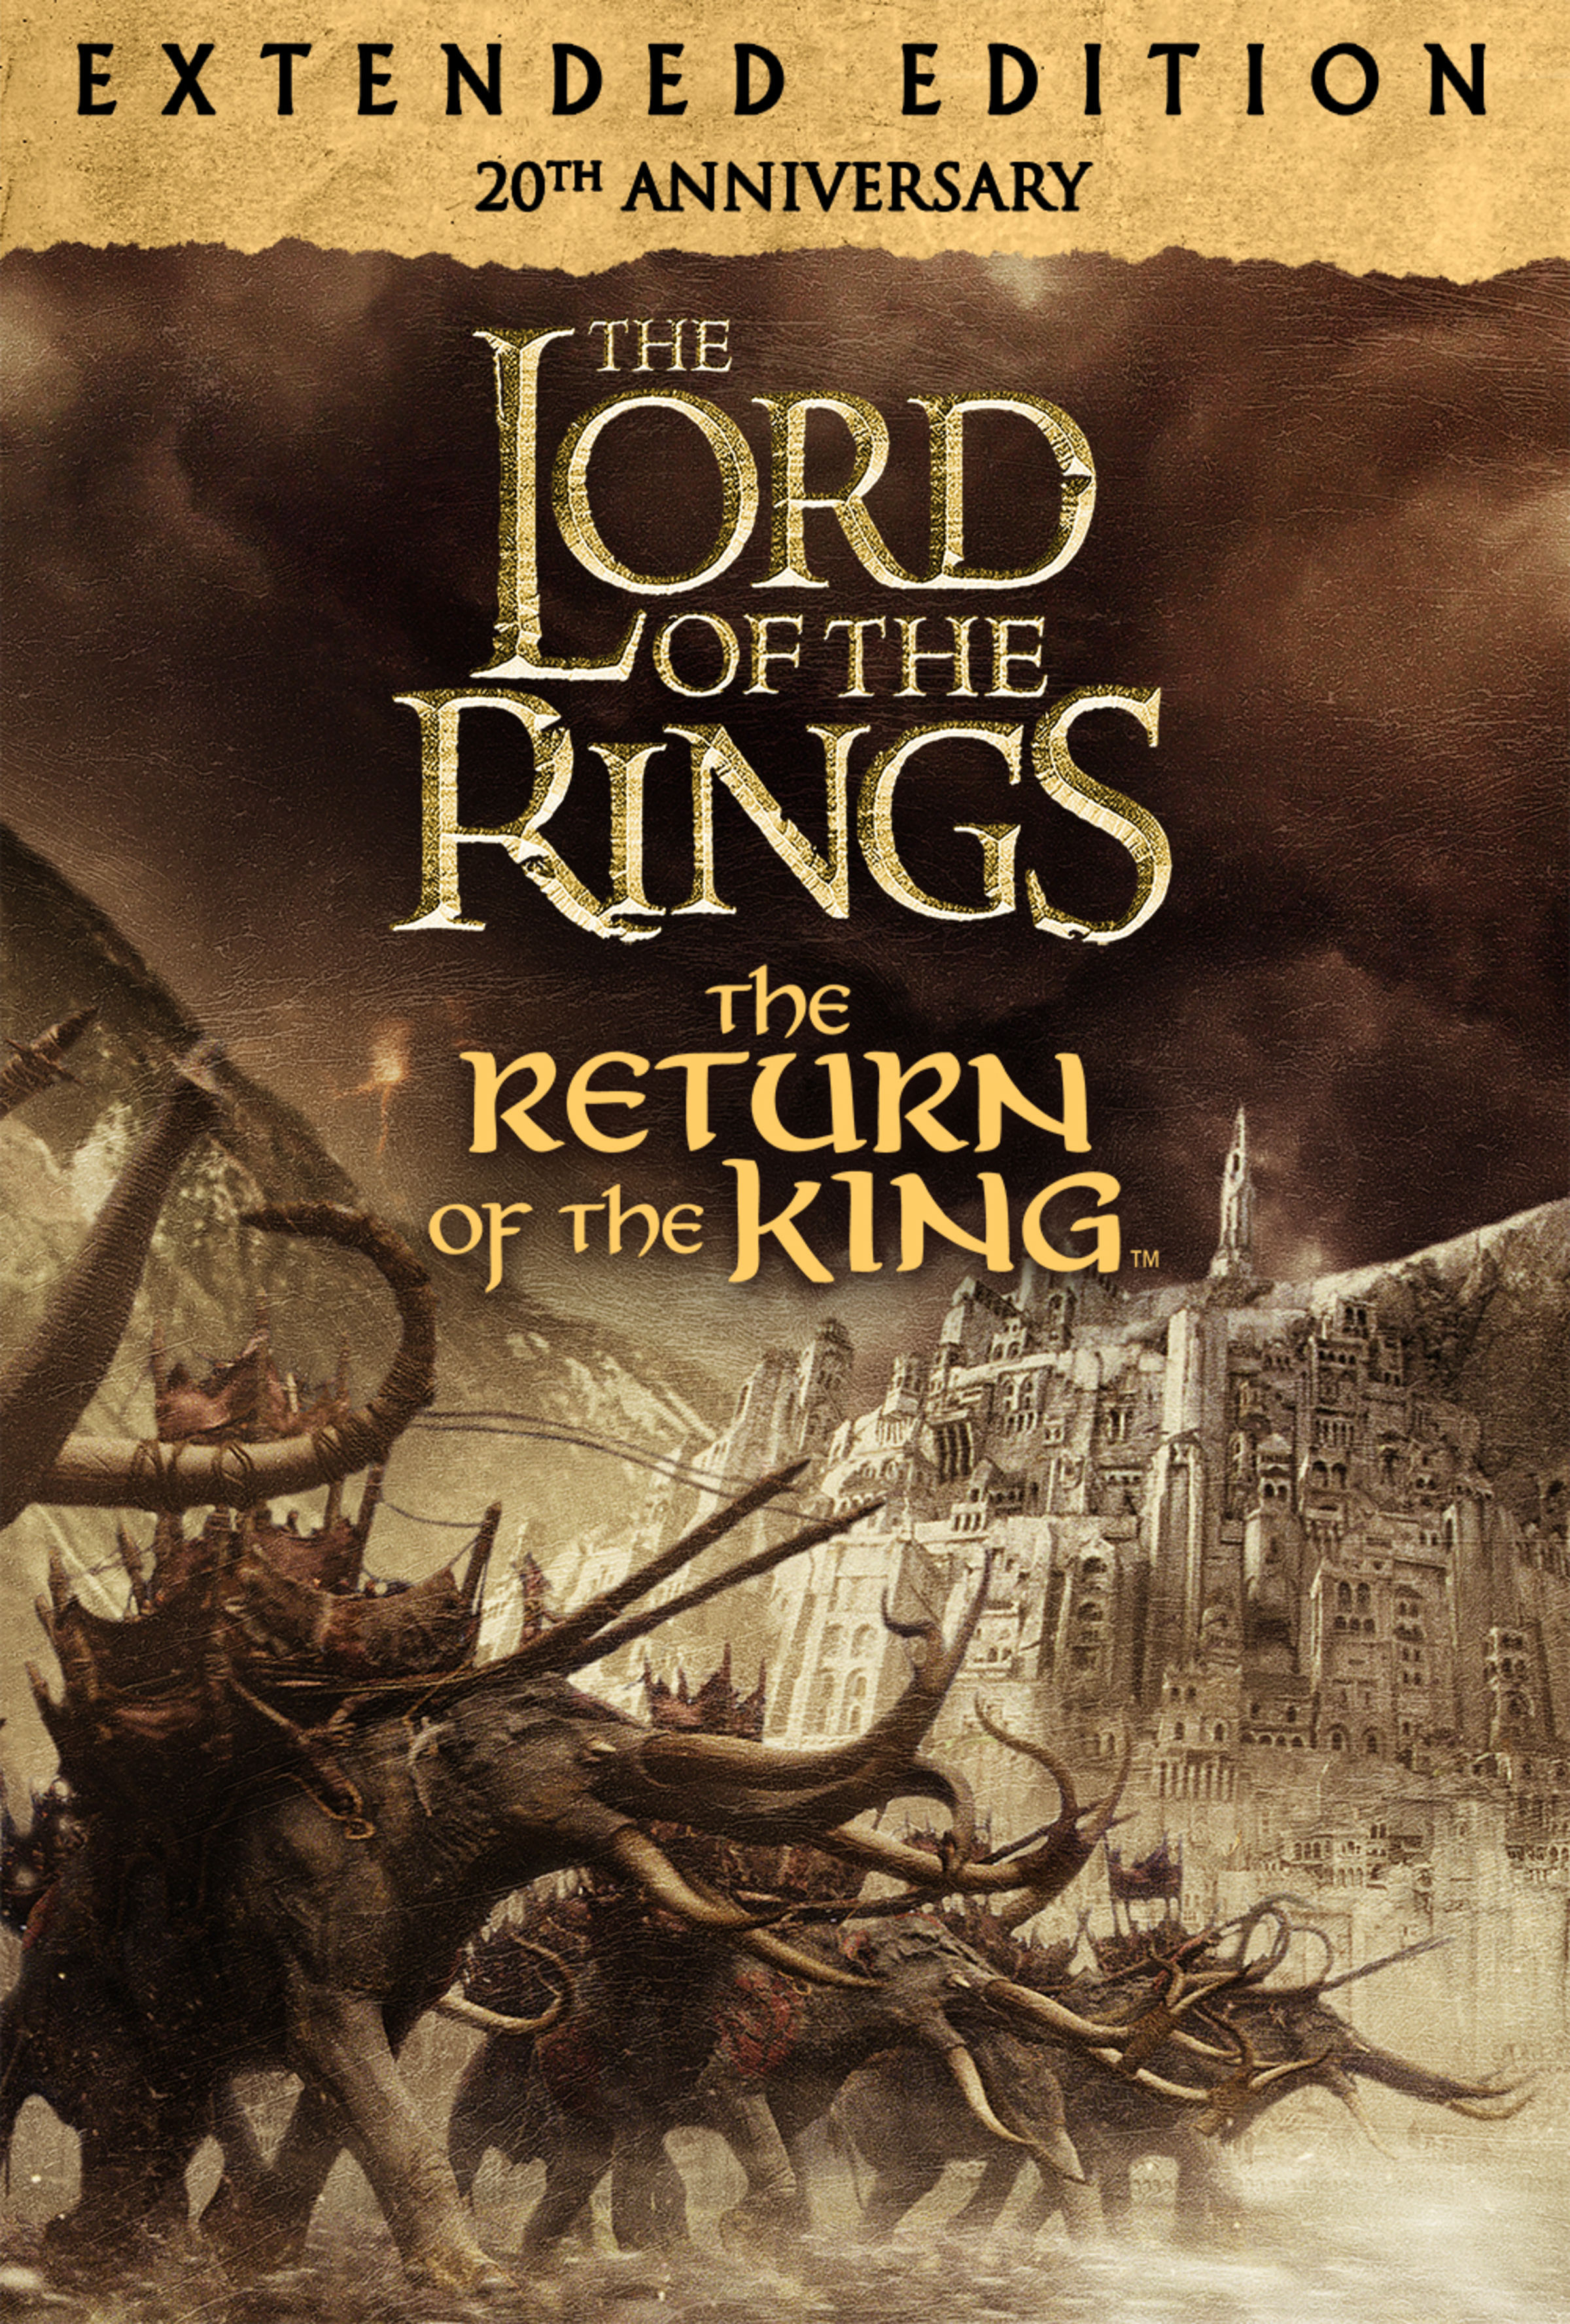 The Lord of the Rings: How Different are the Extended Editions?